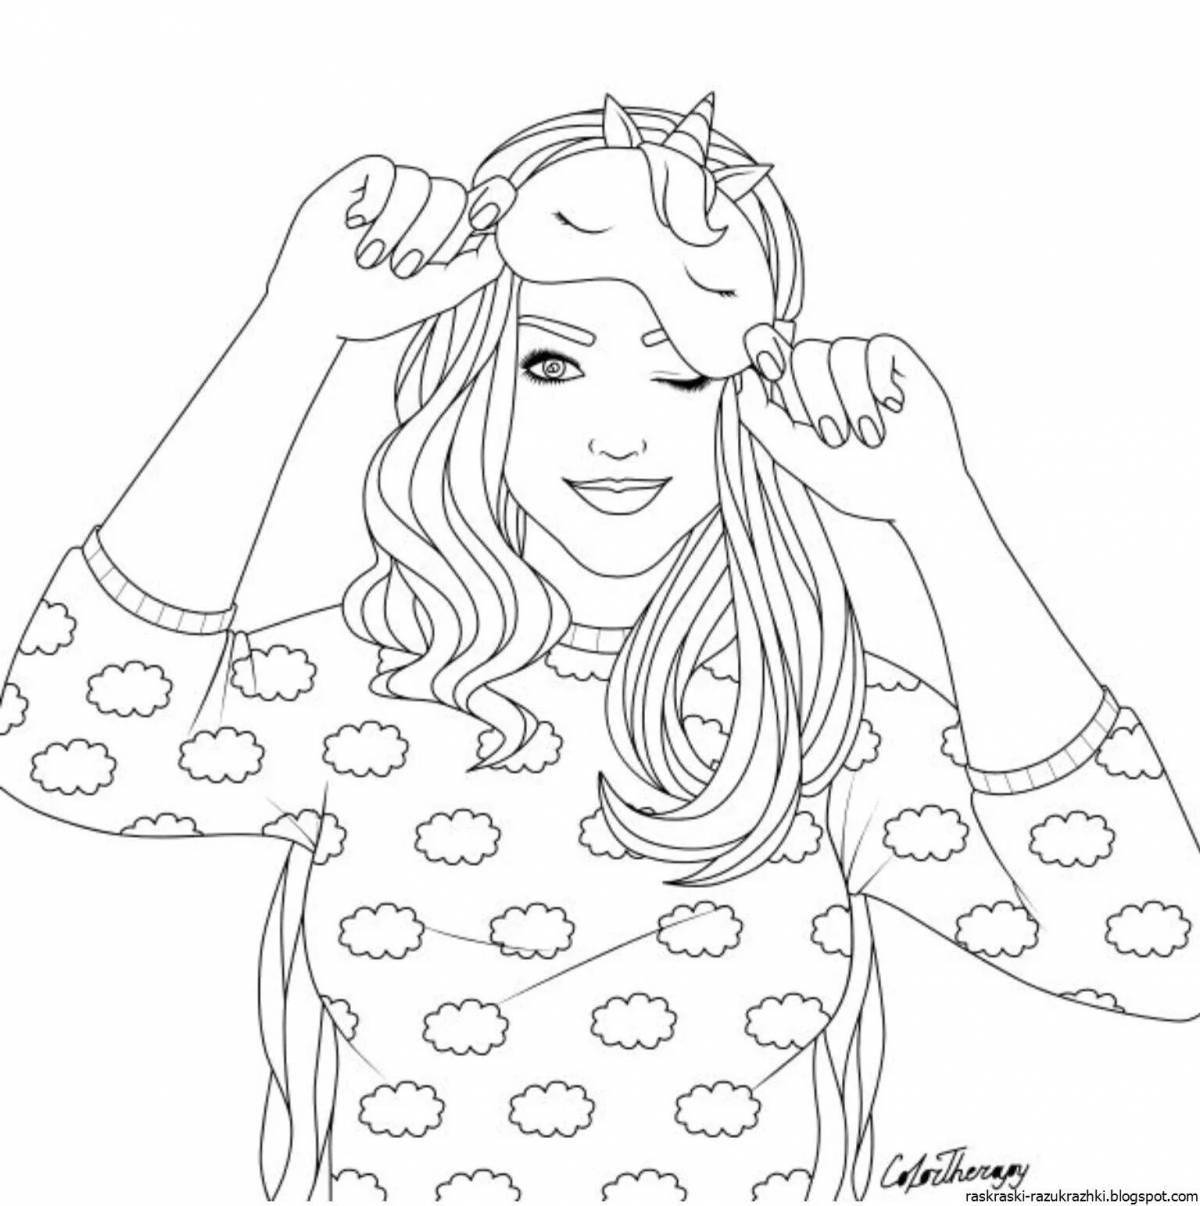 Cool girl cool aesthetic coloring book